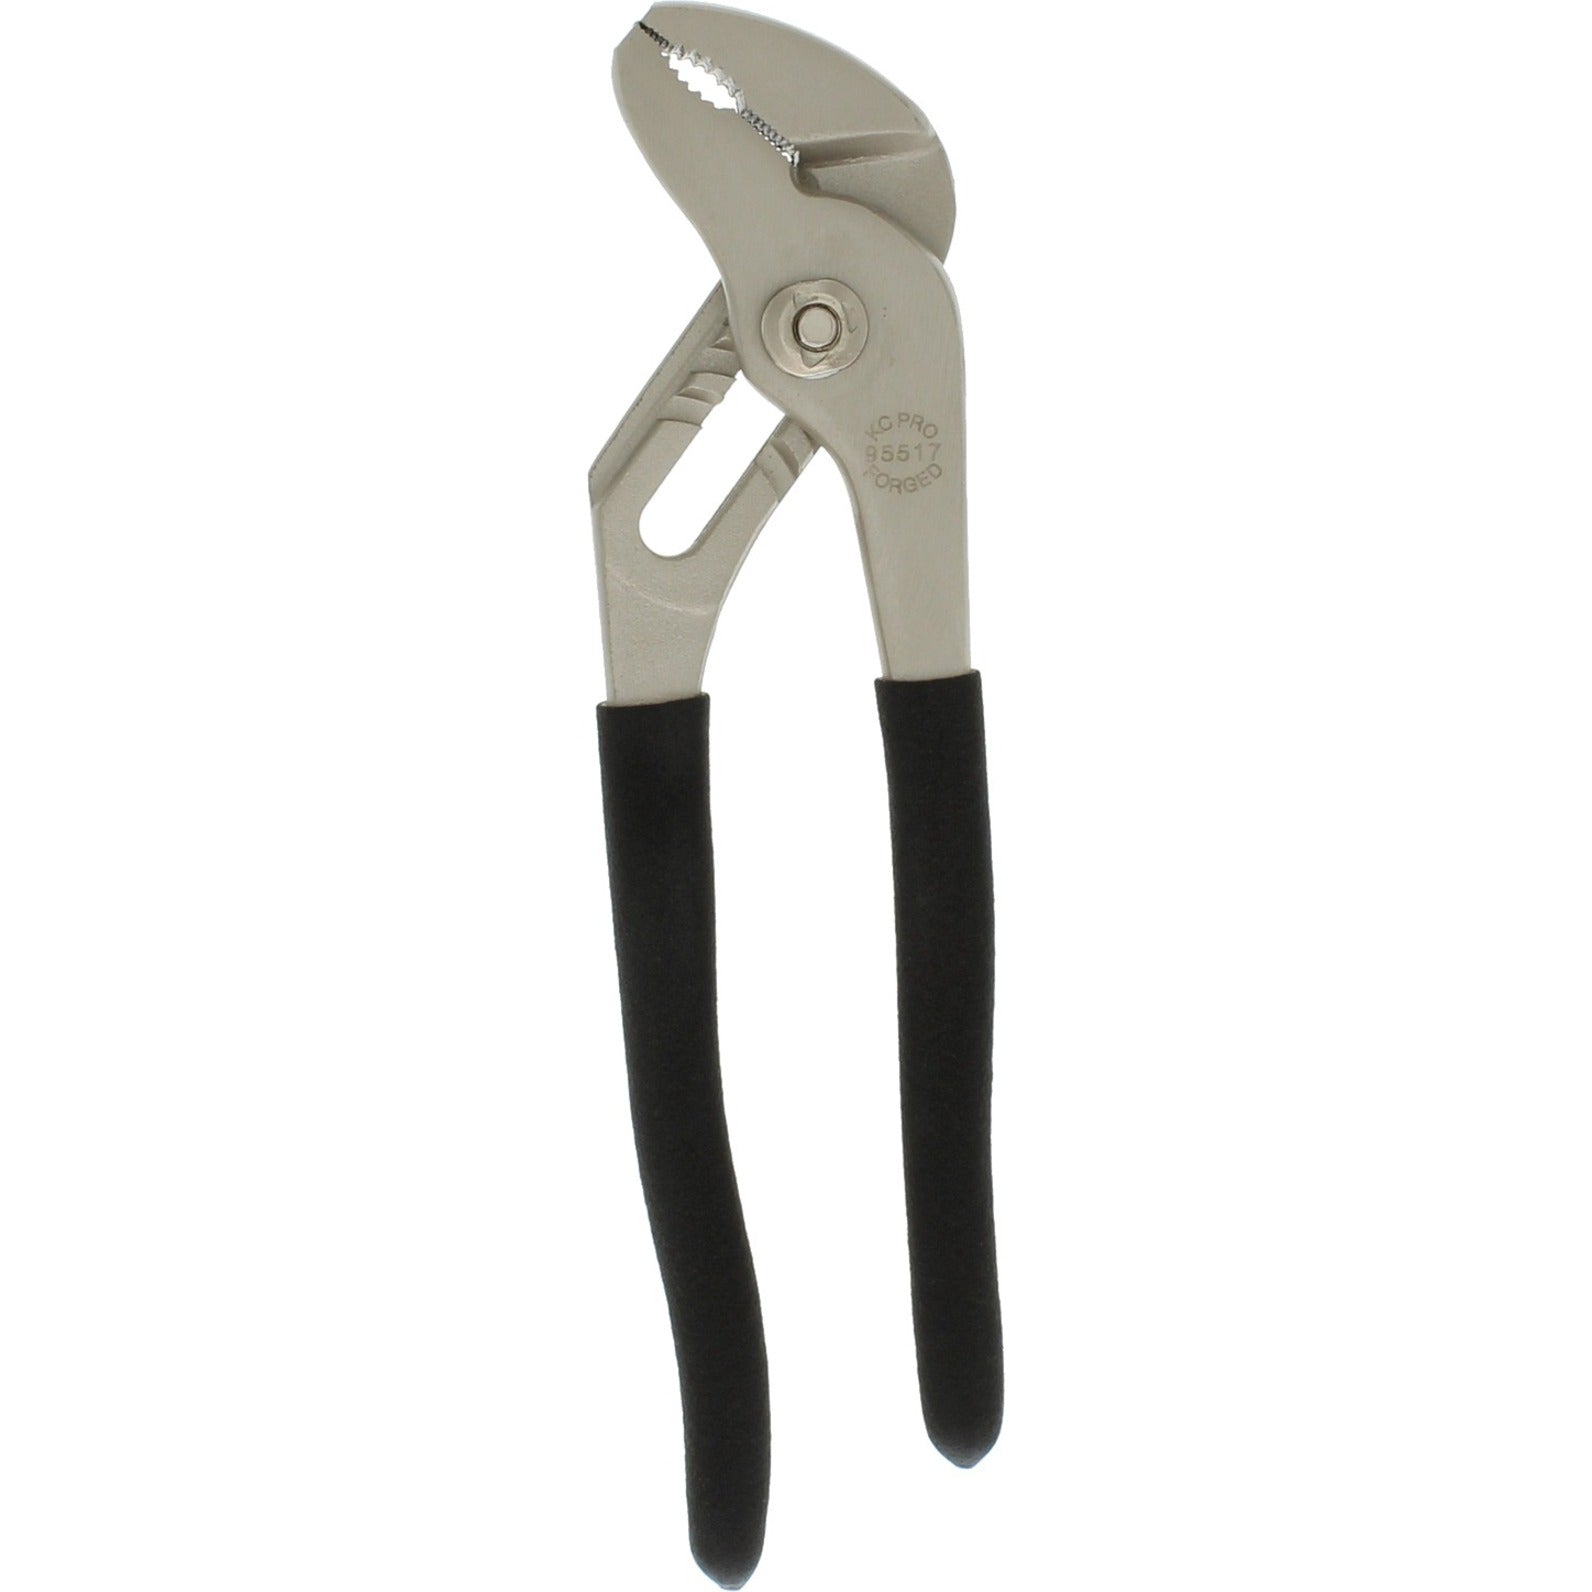 HB Smith 95517 8" Slip-Groove Pliers, Heavy Duty, Chrome Plated, Durable, Non-slip Grip, Drop Forged